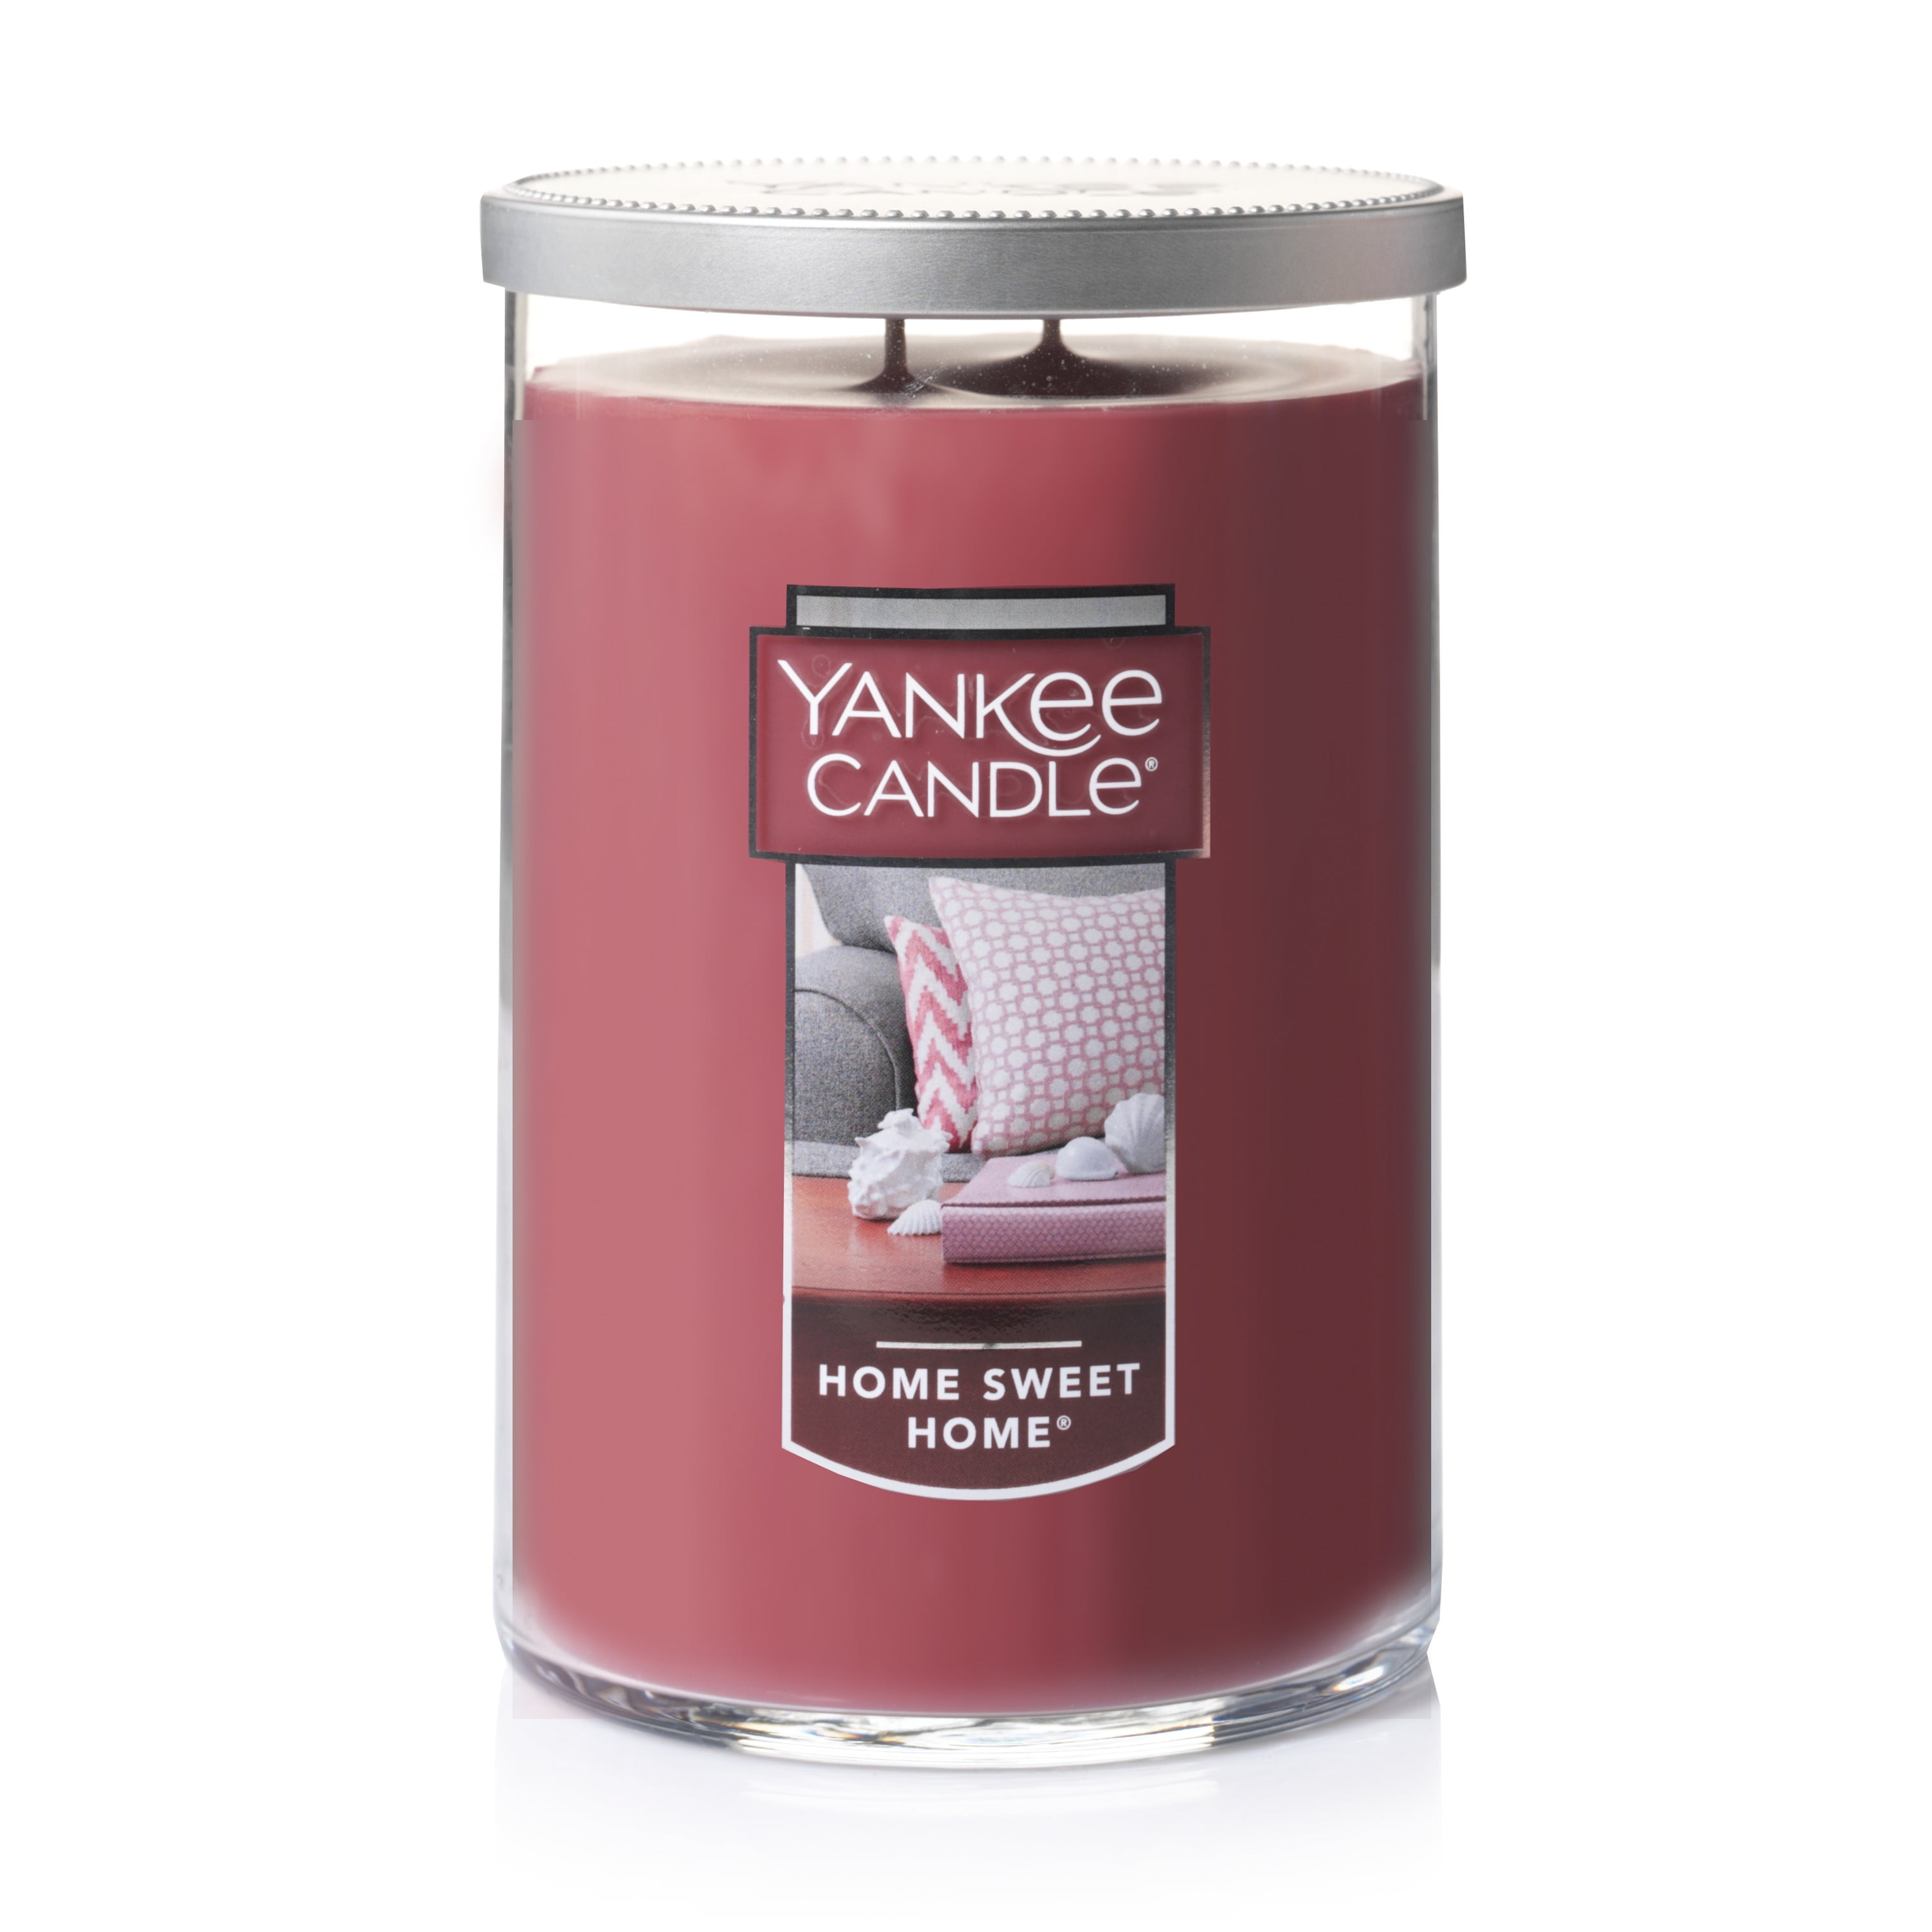 Yankee candles - household items - by owner - housewares sale - craigslist